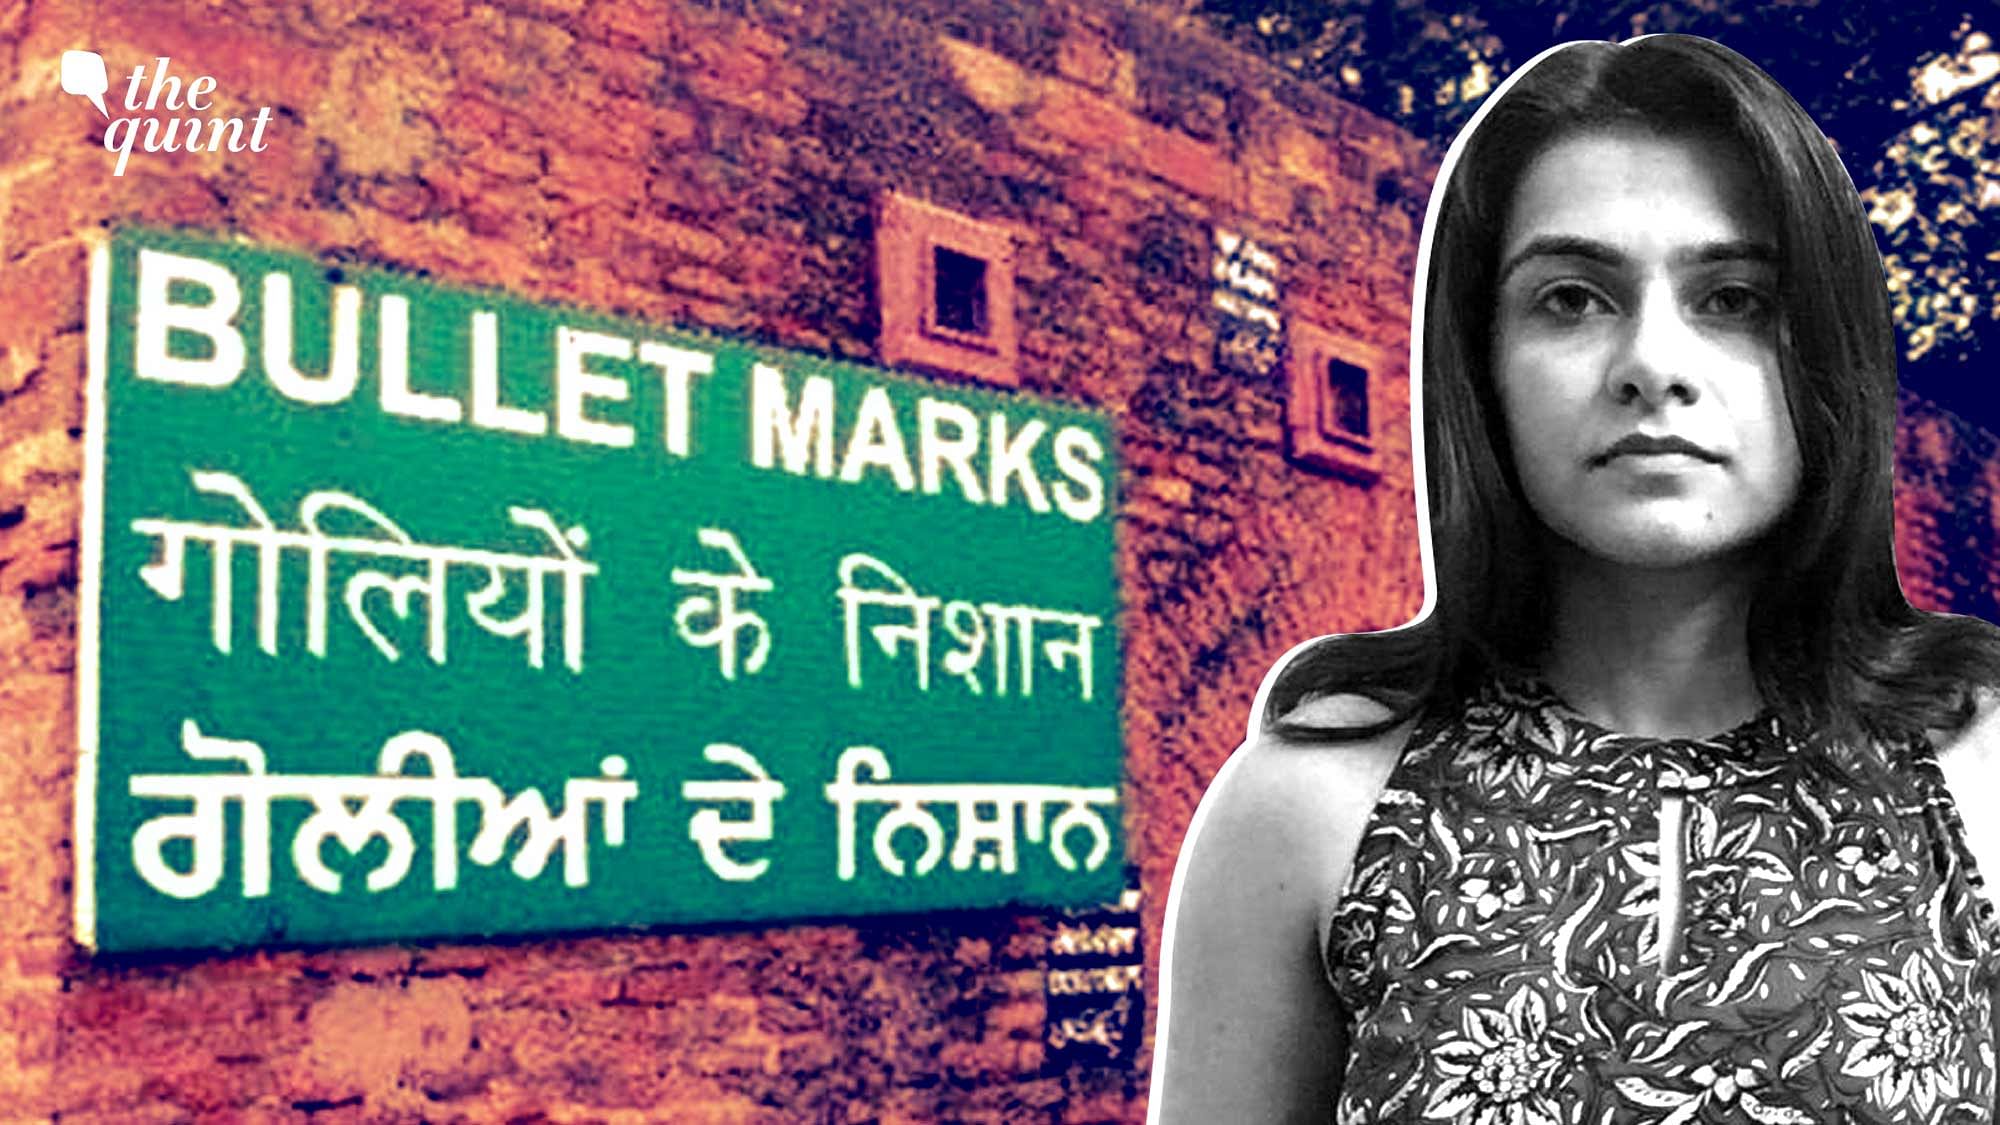 <div class="paragraphs"><p>On 28 August, Prime Minister Narendra Modi inaugurated the renovated <a href="https://www.thequint.com/topic/jallianwala-bagh">Jallianwala Bagh</a> Complex in Amritsar, with fancy murals, glass covers, and a light and sound show to display the “horrific massacre”.</p></div>